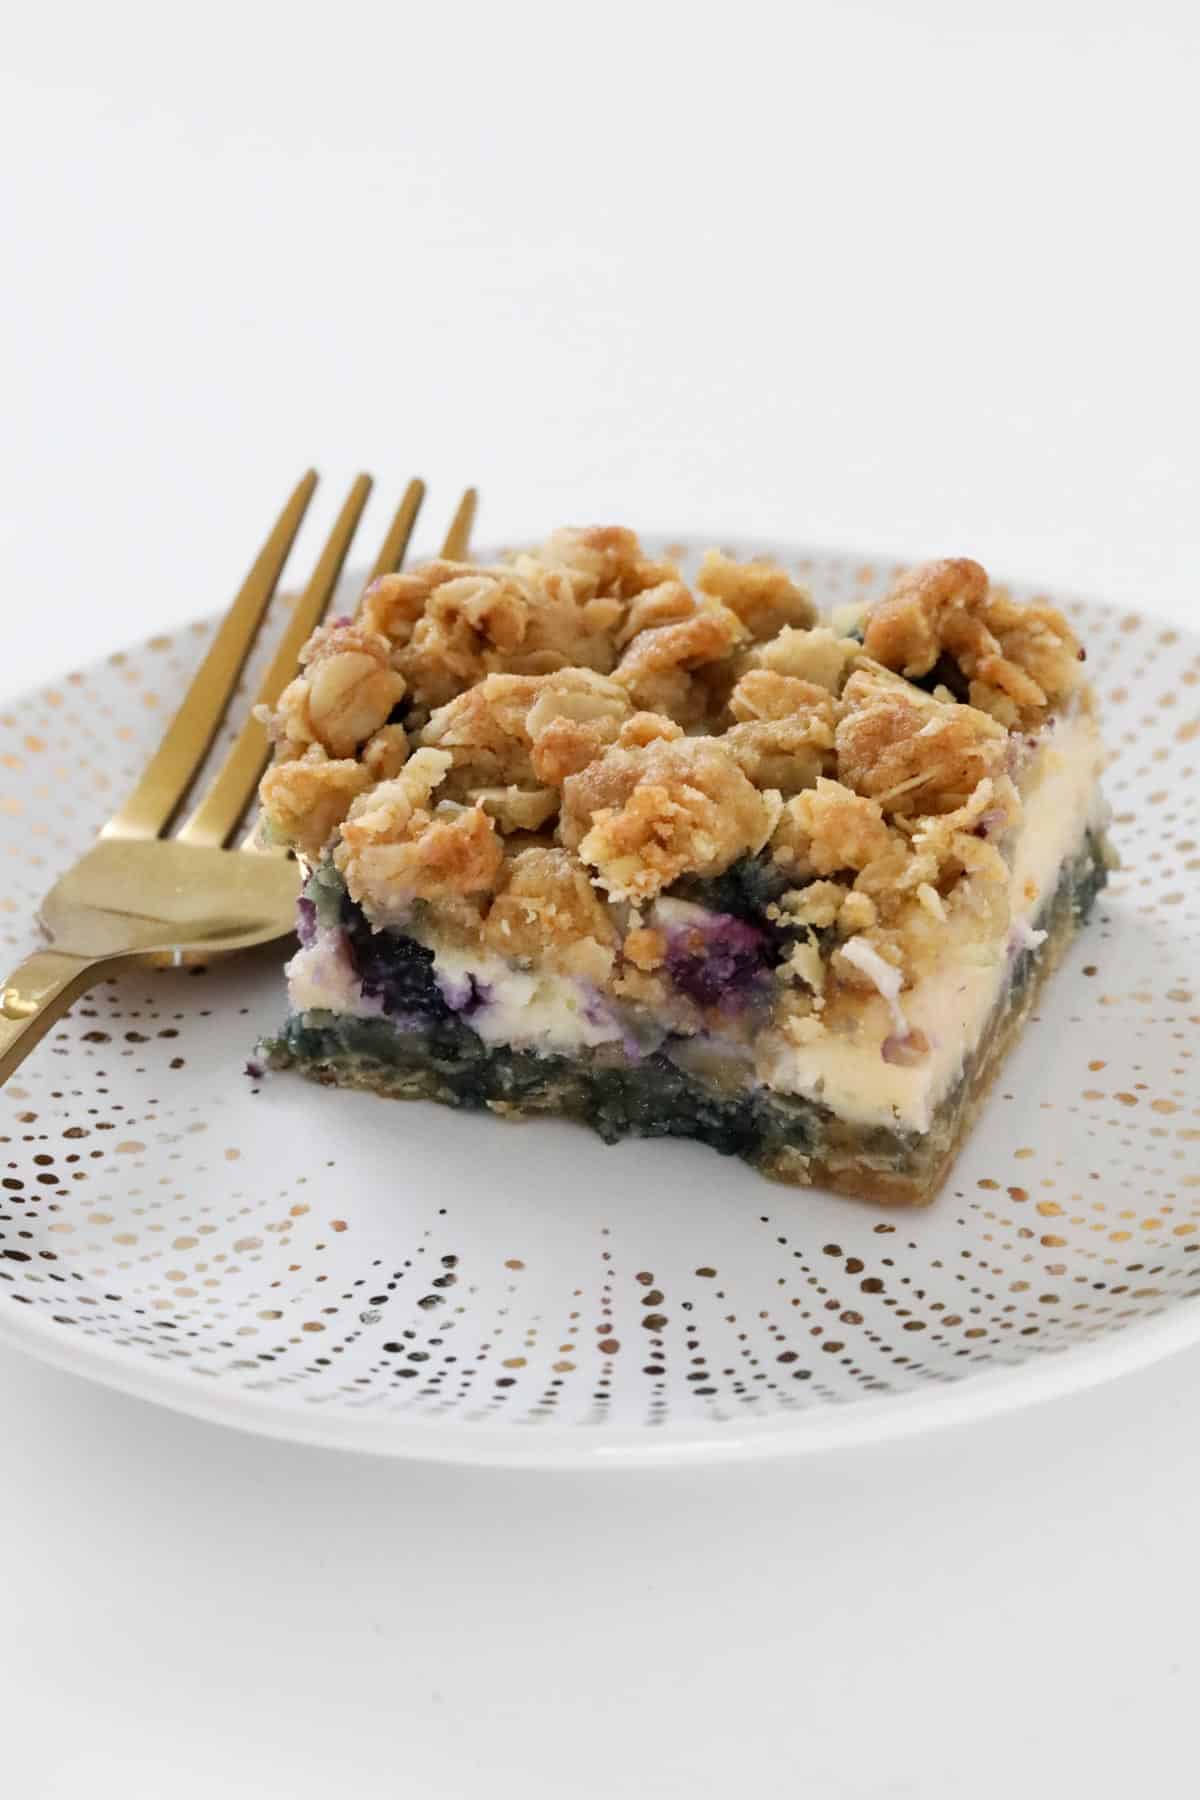 A piece of crumble slice on a white and gold plate with a gold fork resting on the plate next to it.